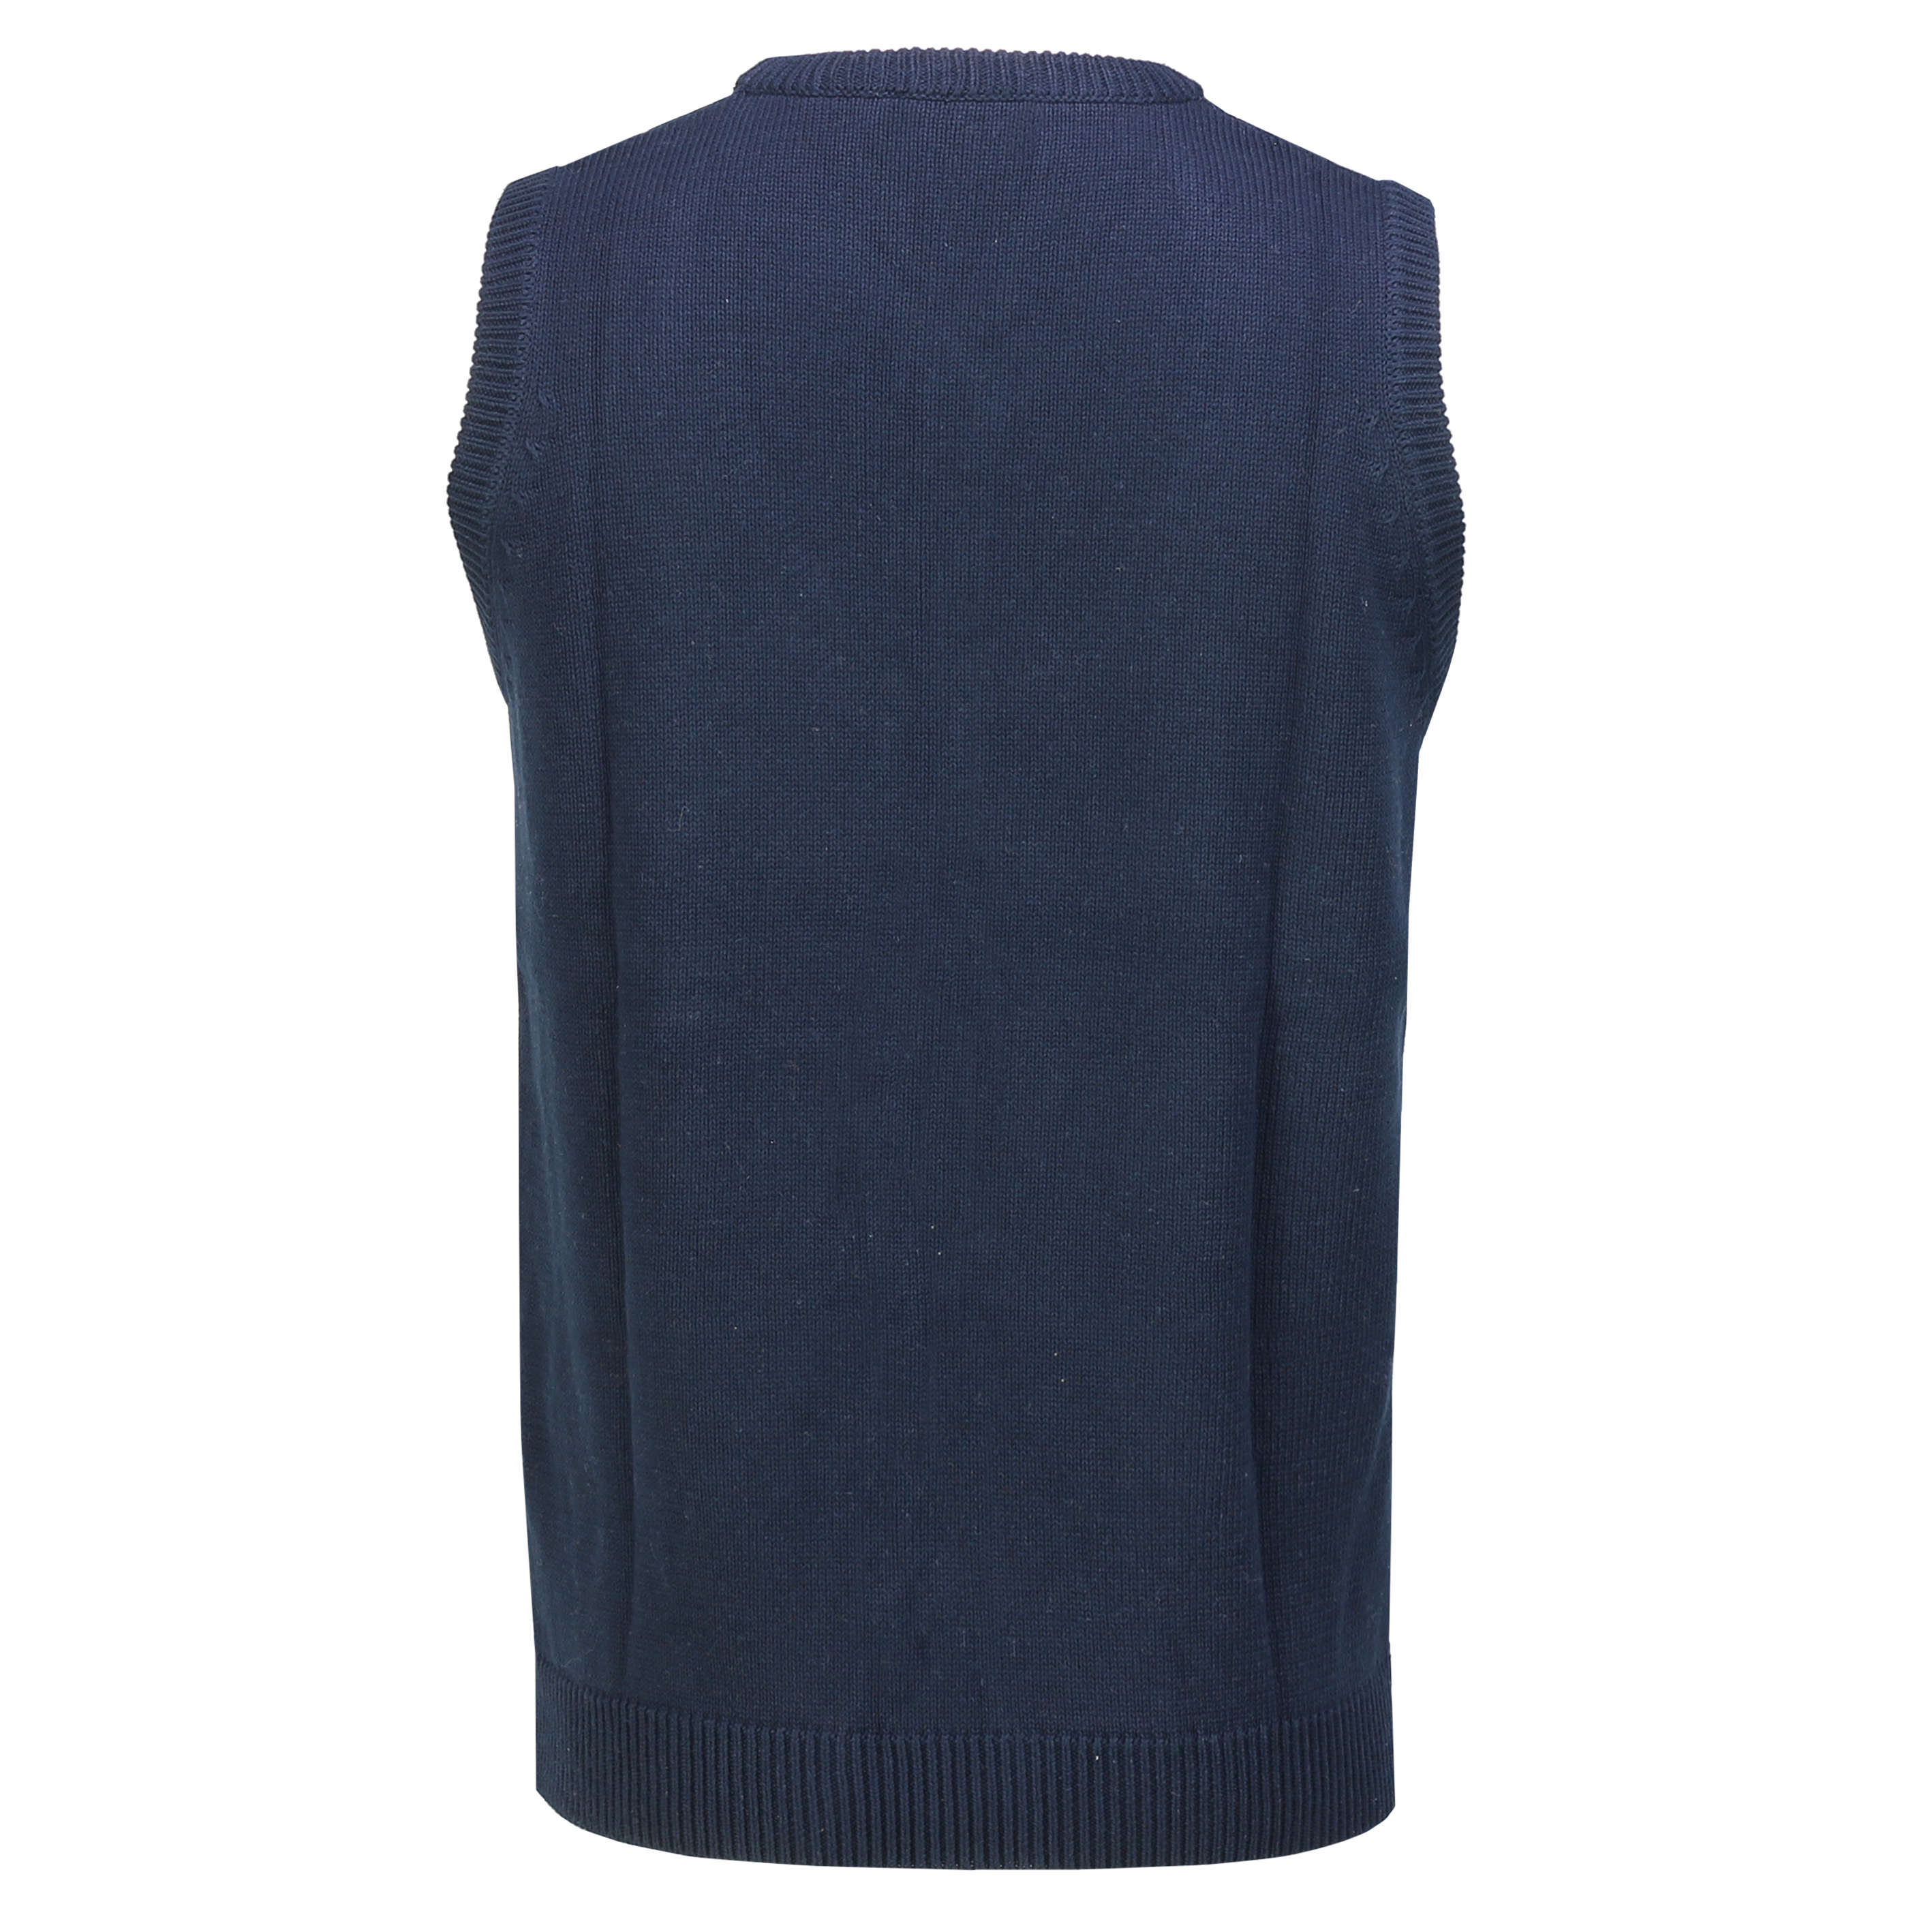 Classic Sleeveless V Neck Navy Jumper Cable Knitted